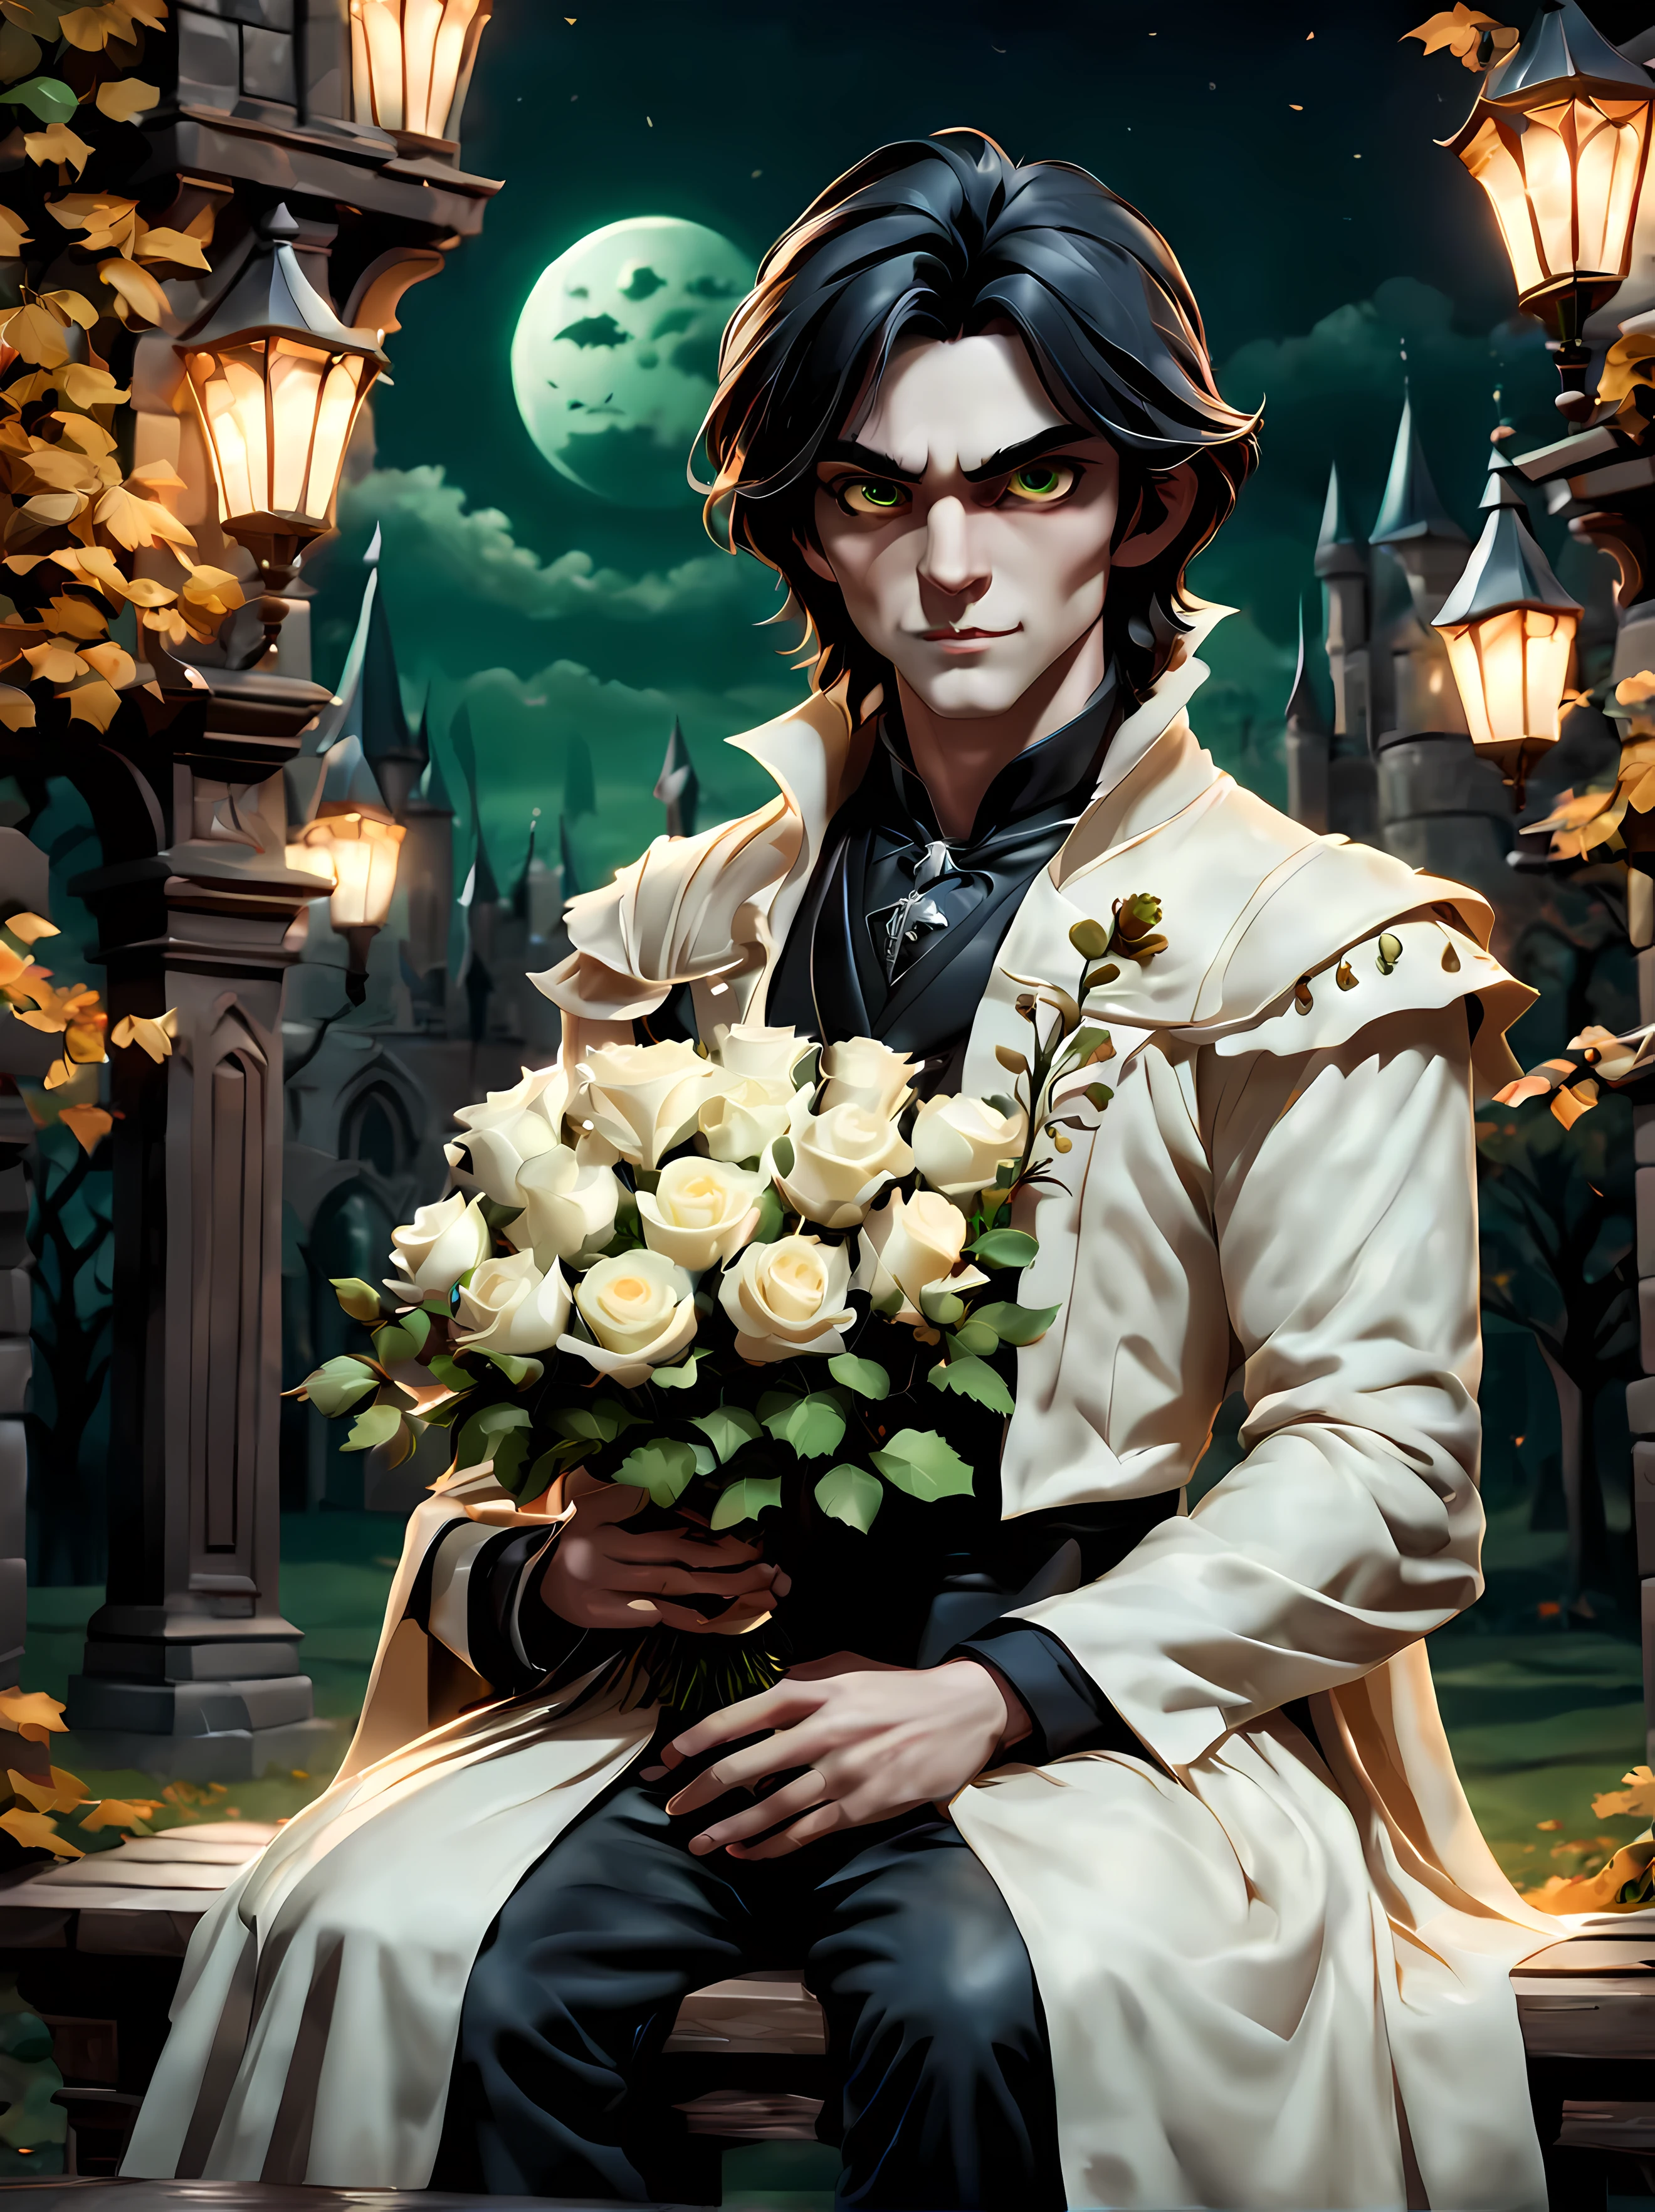 3D Render Style, 3DRenderAF, Perfect Hands, Masterpiece in maximum 16K resolution, (cute cartoon style:1.3), a (((solo))) mid shot of a handsome vampire (male) ((sitting on an elegant bench)) in a moonlit autumn garden, (complex rich gothic patterns with golden lines), the vampire is wearing an elegant flowing gown, he has (vivid green eyes), and long black hair, (((holding a bouquet of white roses in his hands, looking up with anticipation))), gothic castle in the background, night. | ((More_Detail))